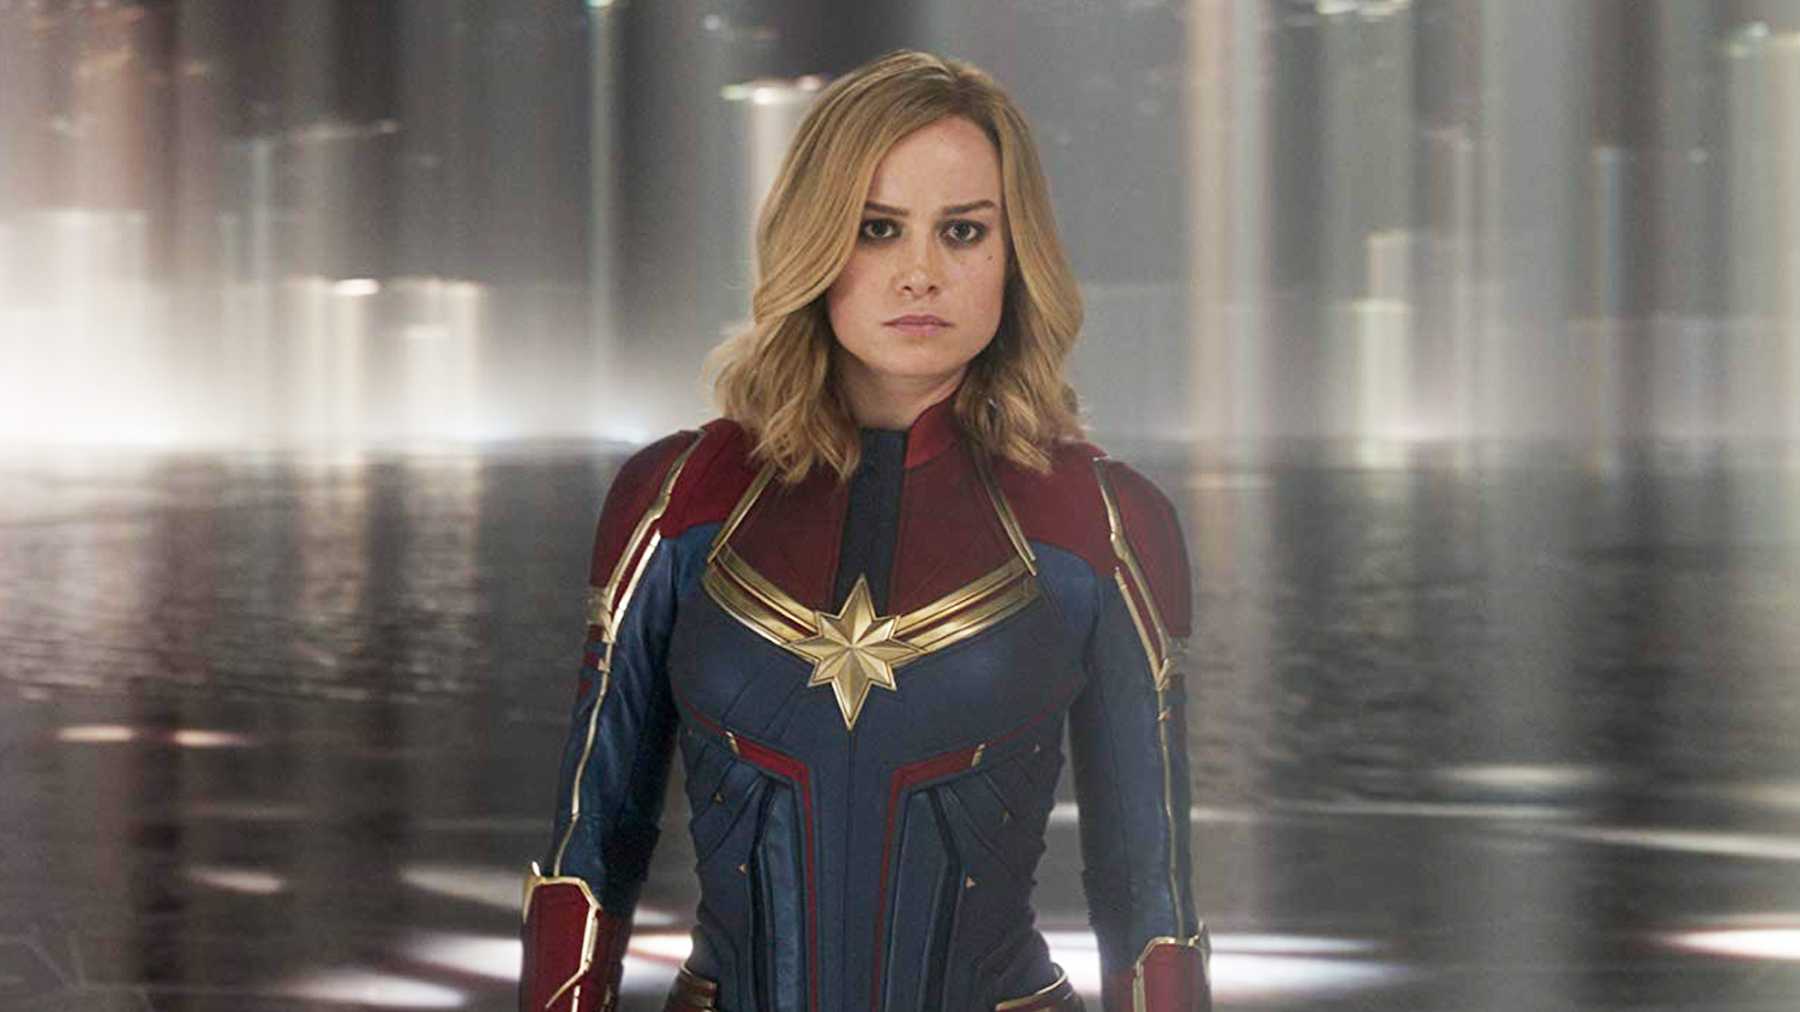 Brie Larson as Captain Marvel, one of the best films of 2019